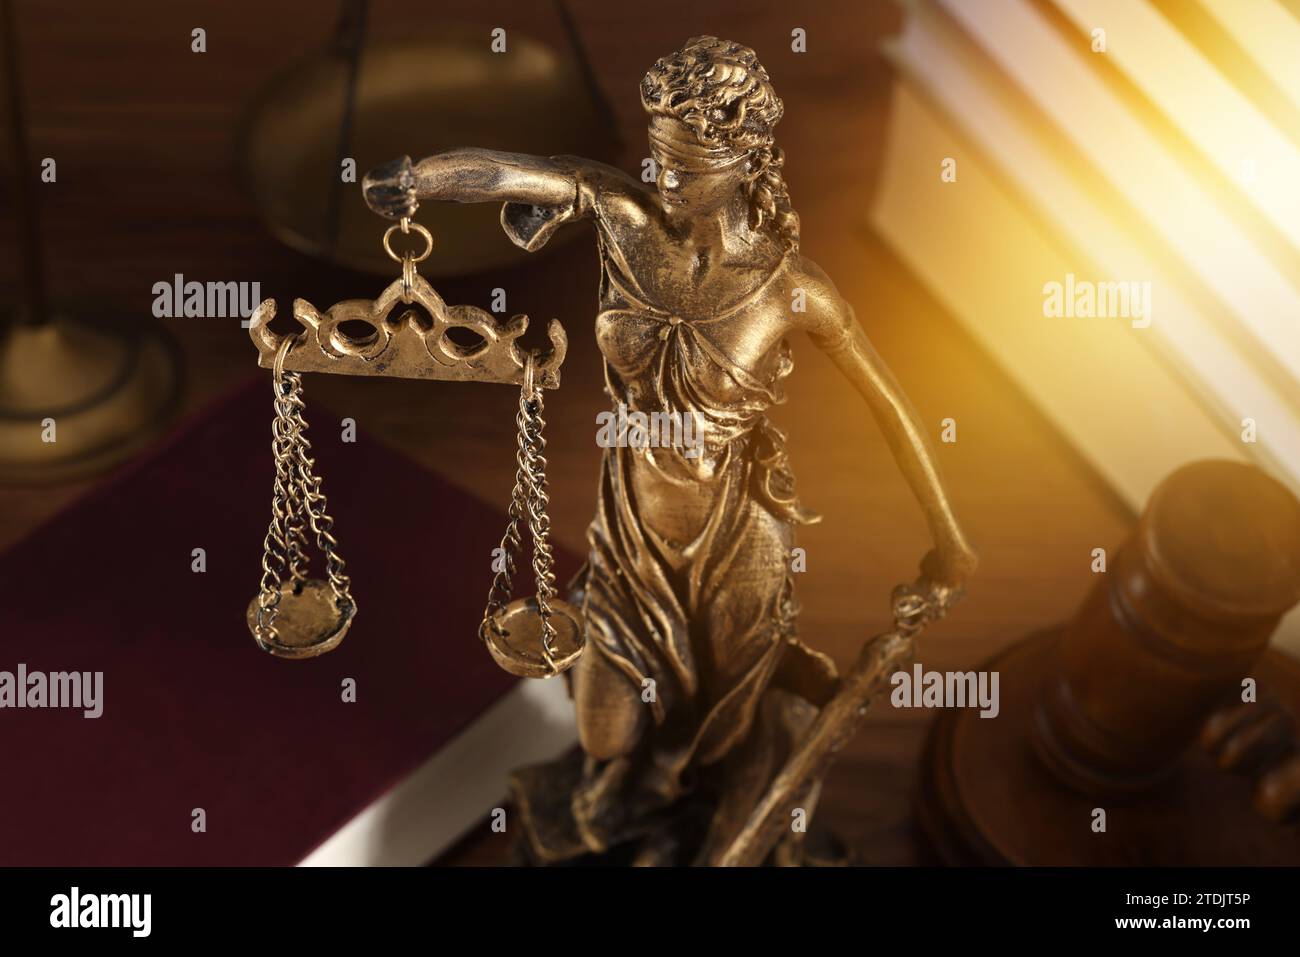 Symbol of fair treatment under law. Statue of Lady Justice, books and gavel on wooden table, closeup Stock Photo